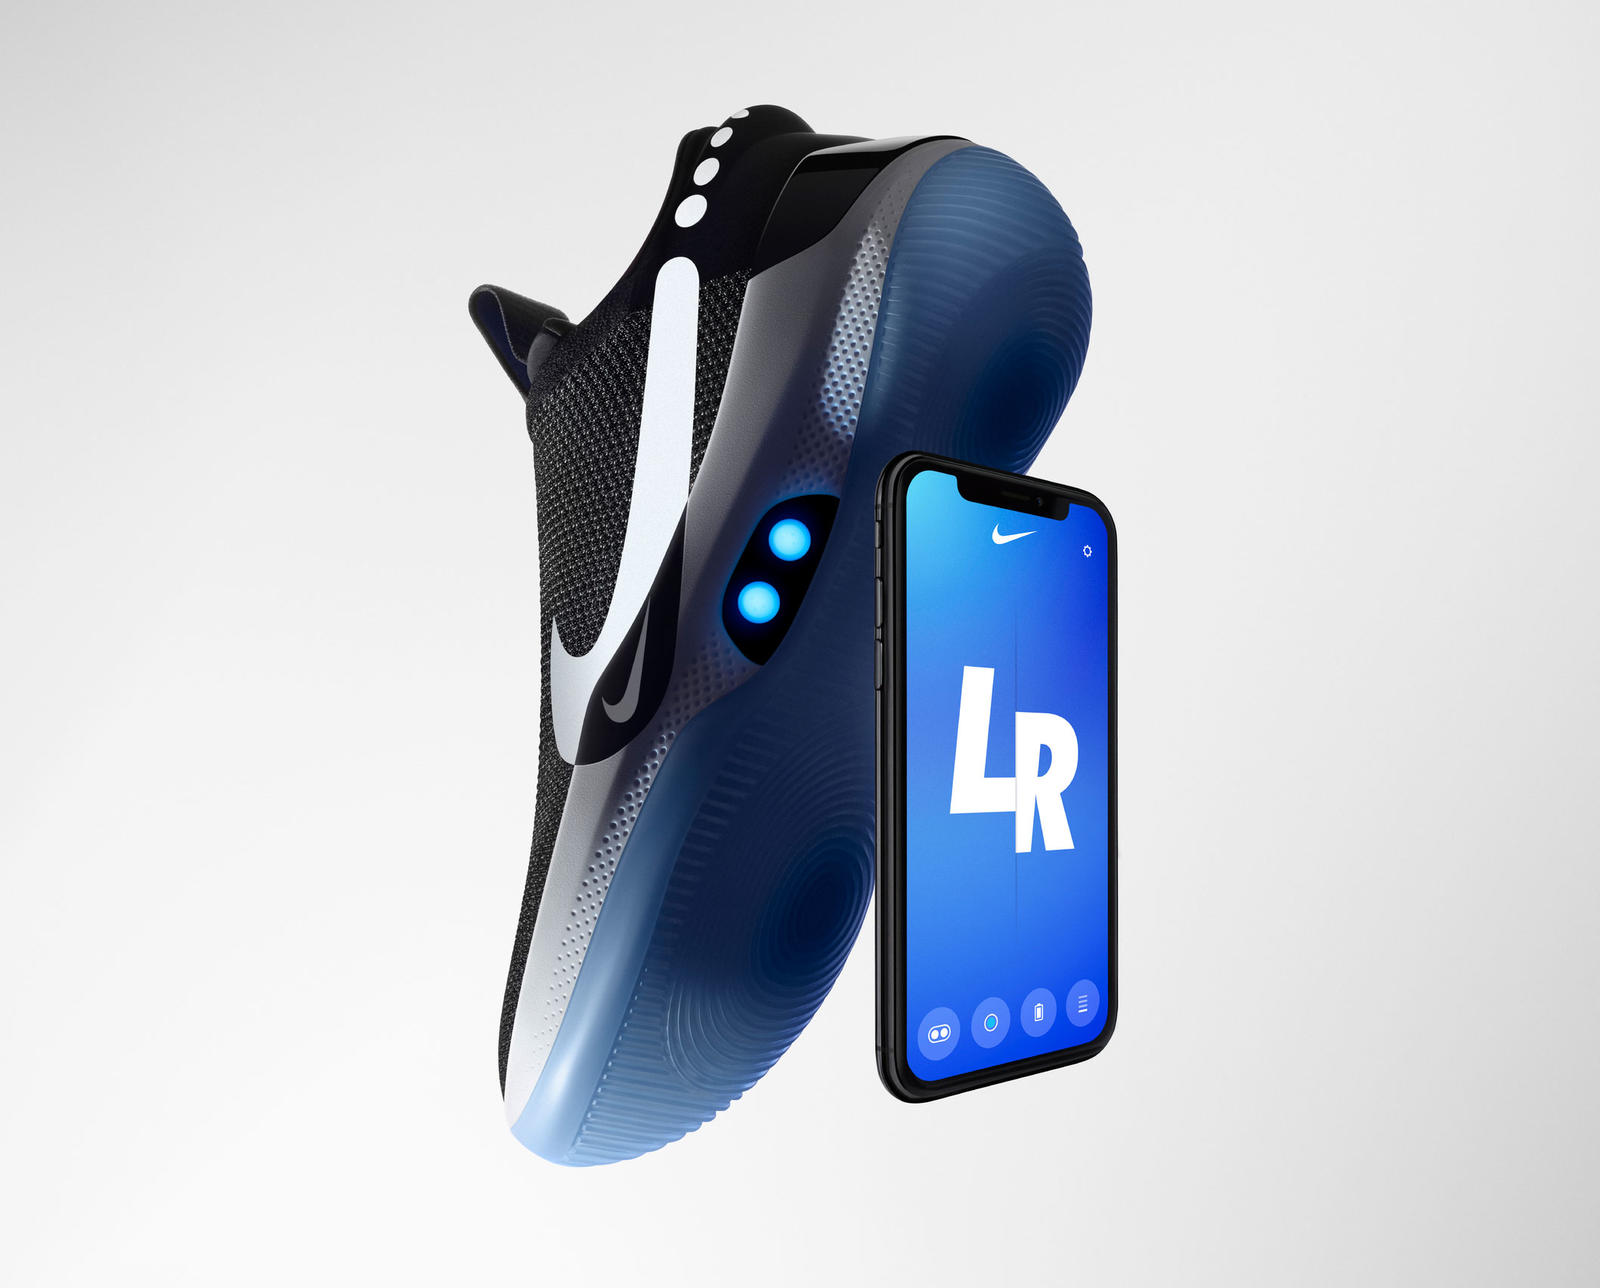 Nike unveiled a of self-lacing shoes that you can control with an app |